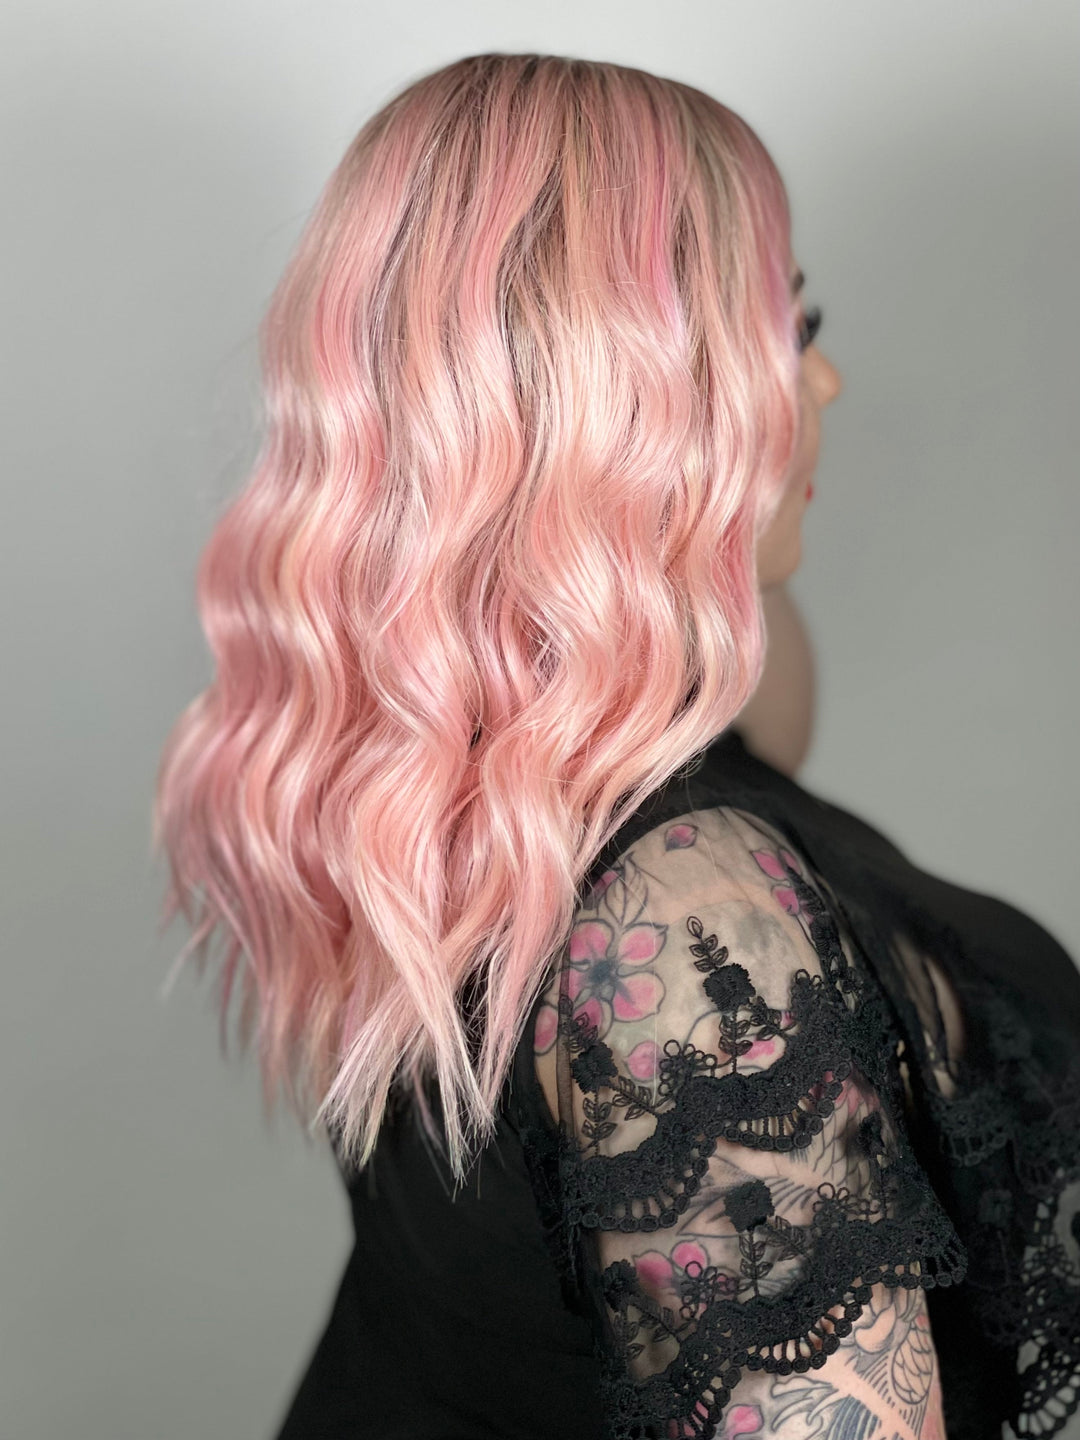 Styles-By-Soma LUXURY WIG RUSH HOUR (LUXE) - Dusty Rose